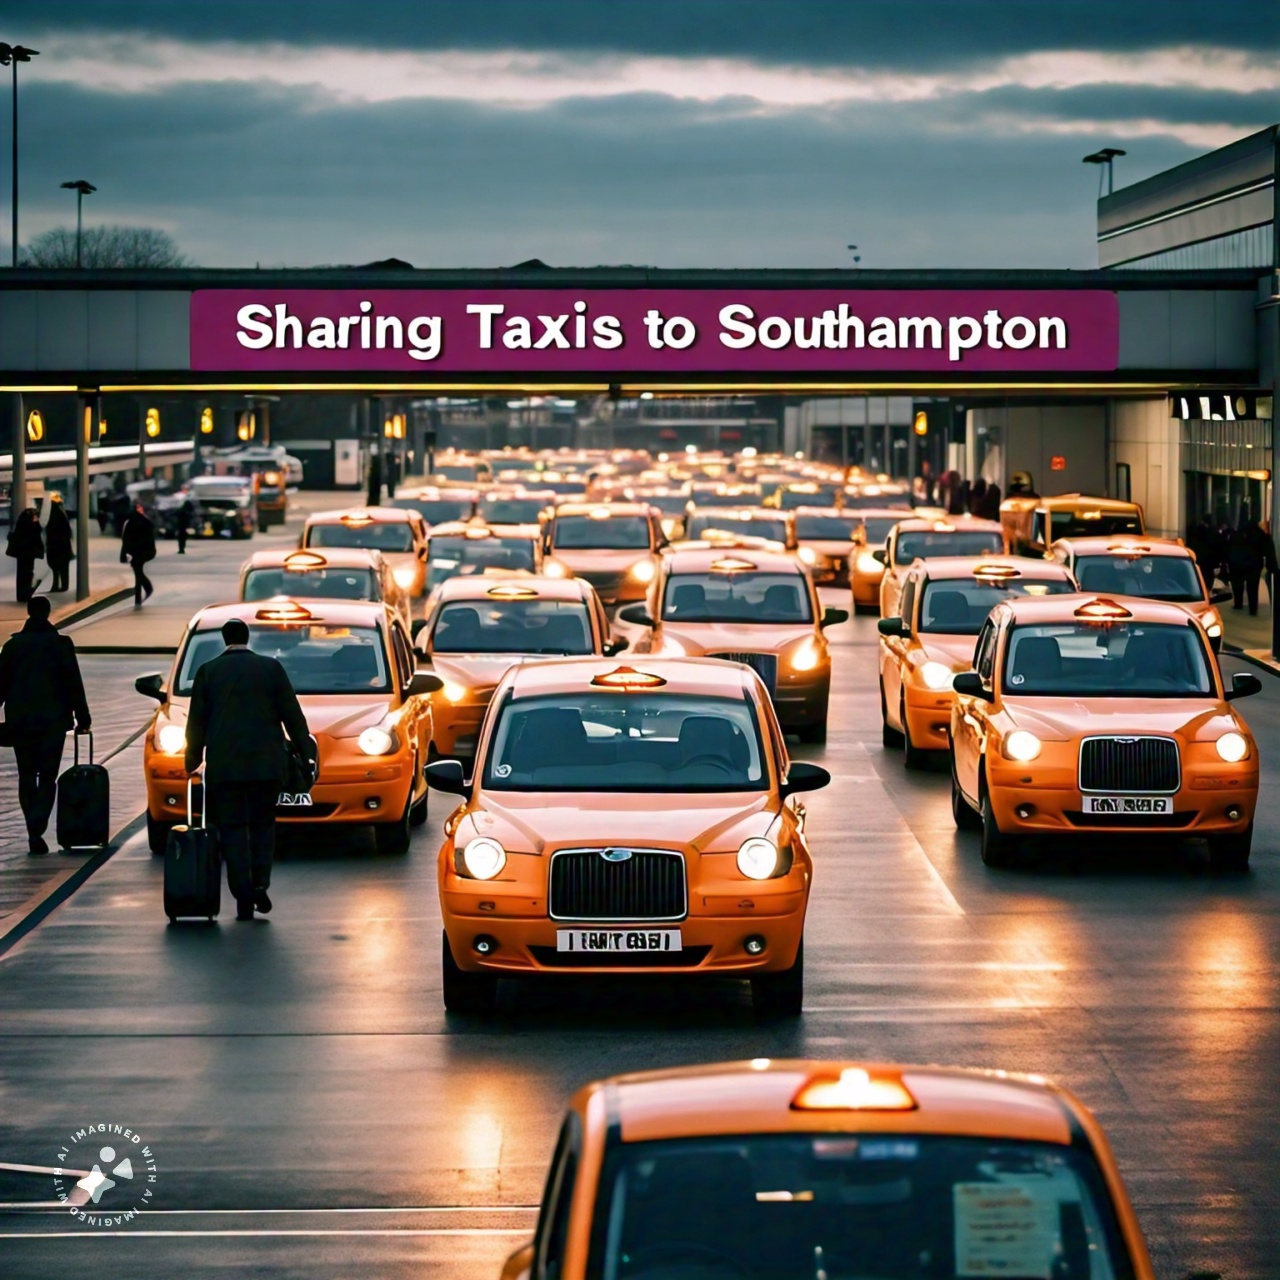 Sharing Taxis from Heathrow to Southampton for Cost-Effectiveness